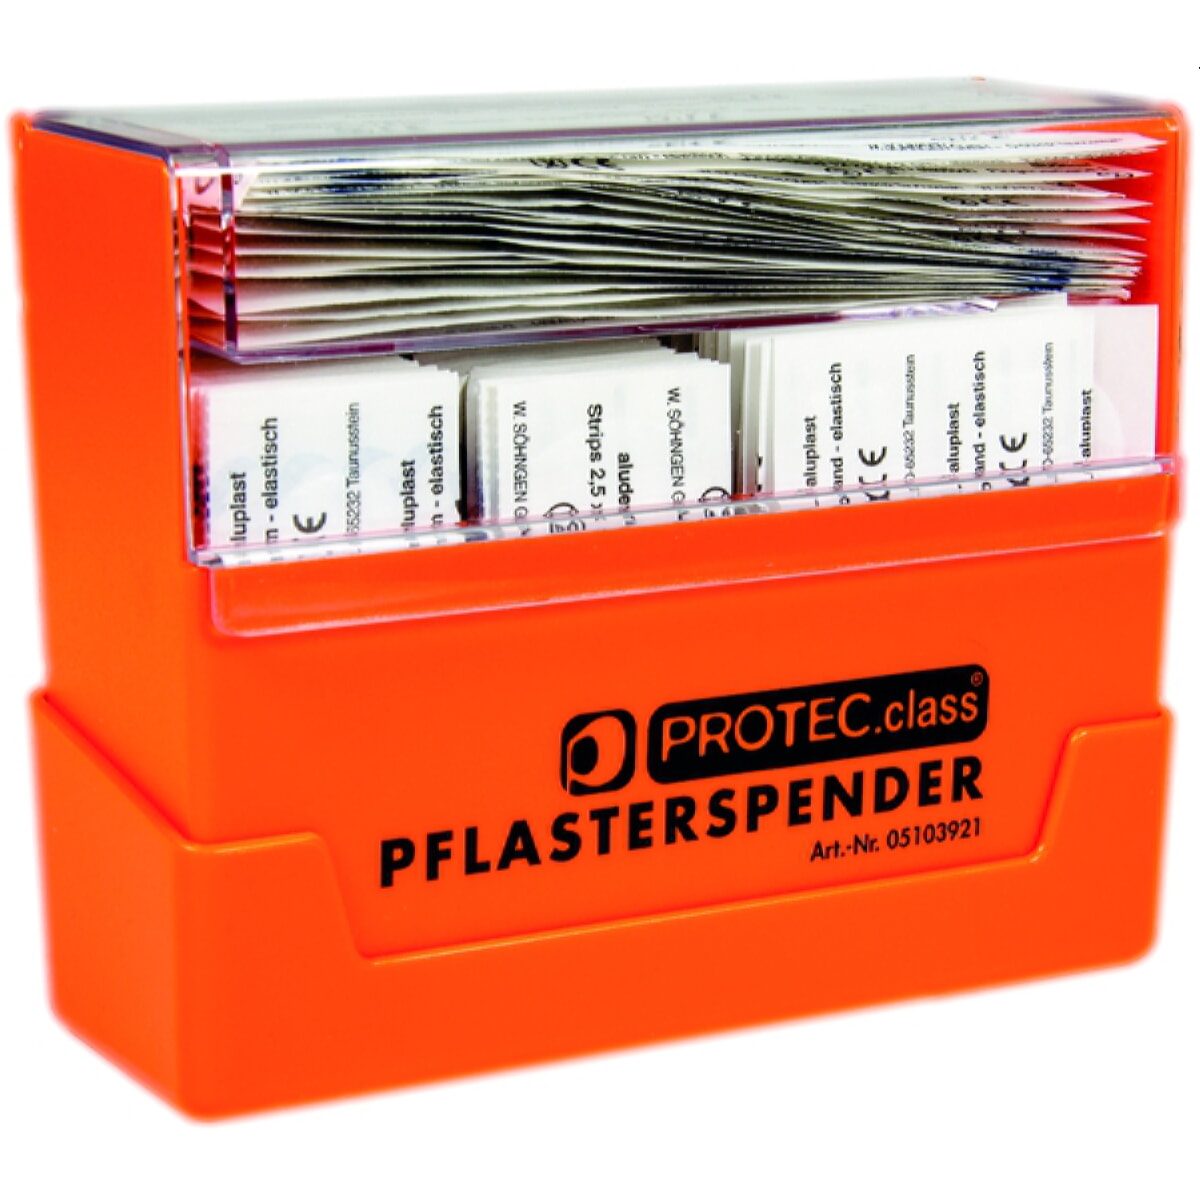 PROTEC.class Pflasterspender PPFS 115 115teilig 05103921